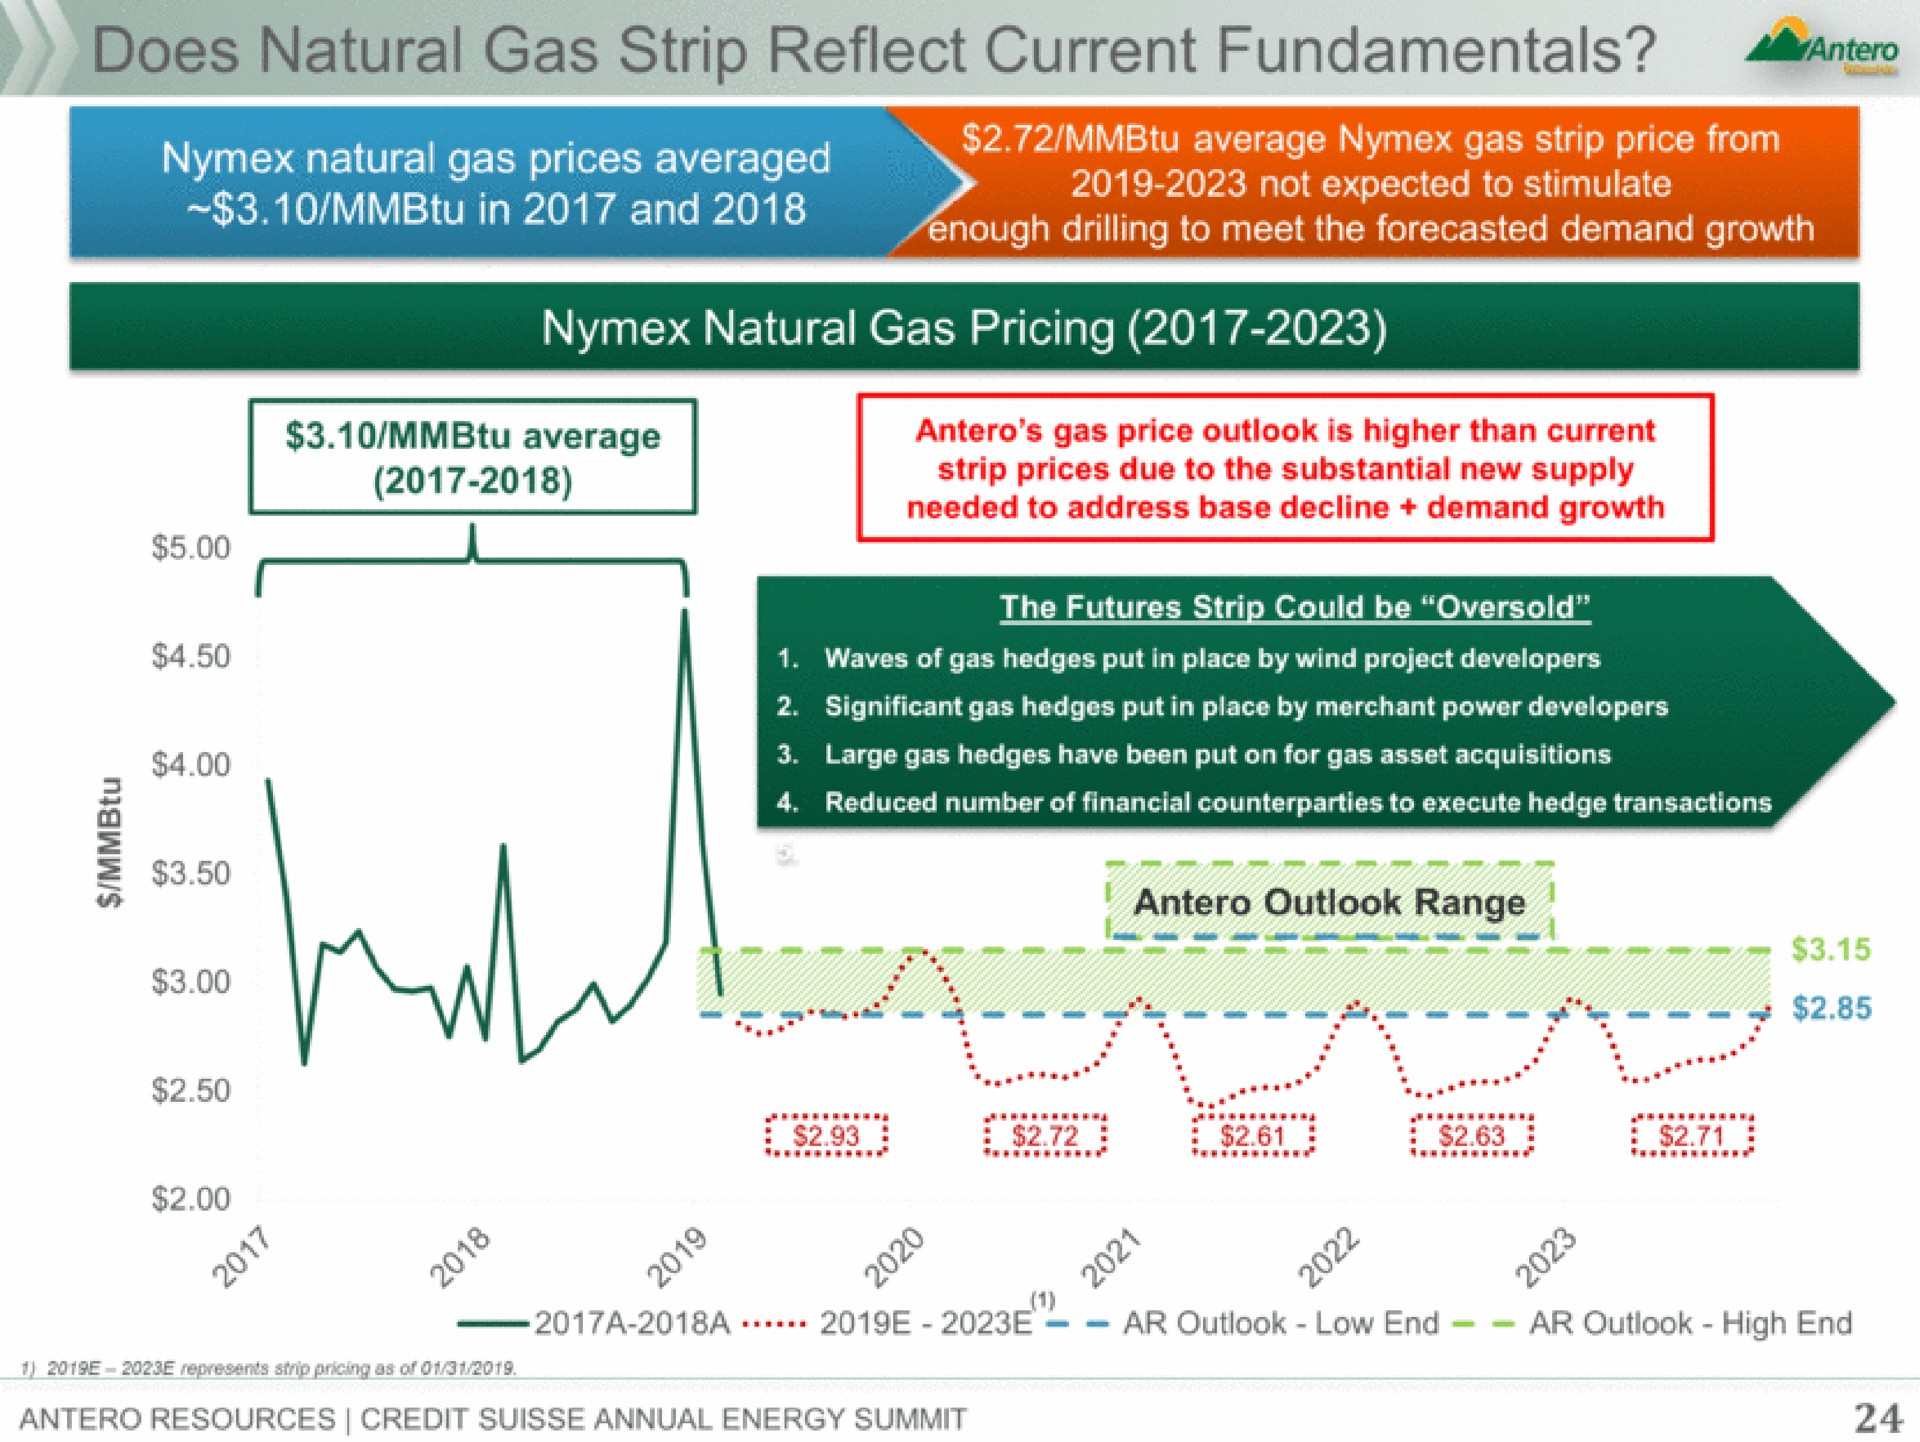 does natural gas strip reflect current fundamentals | Antero Midstream Partners